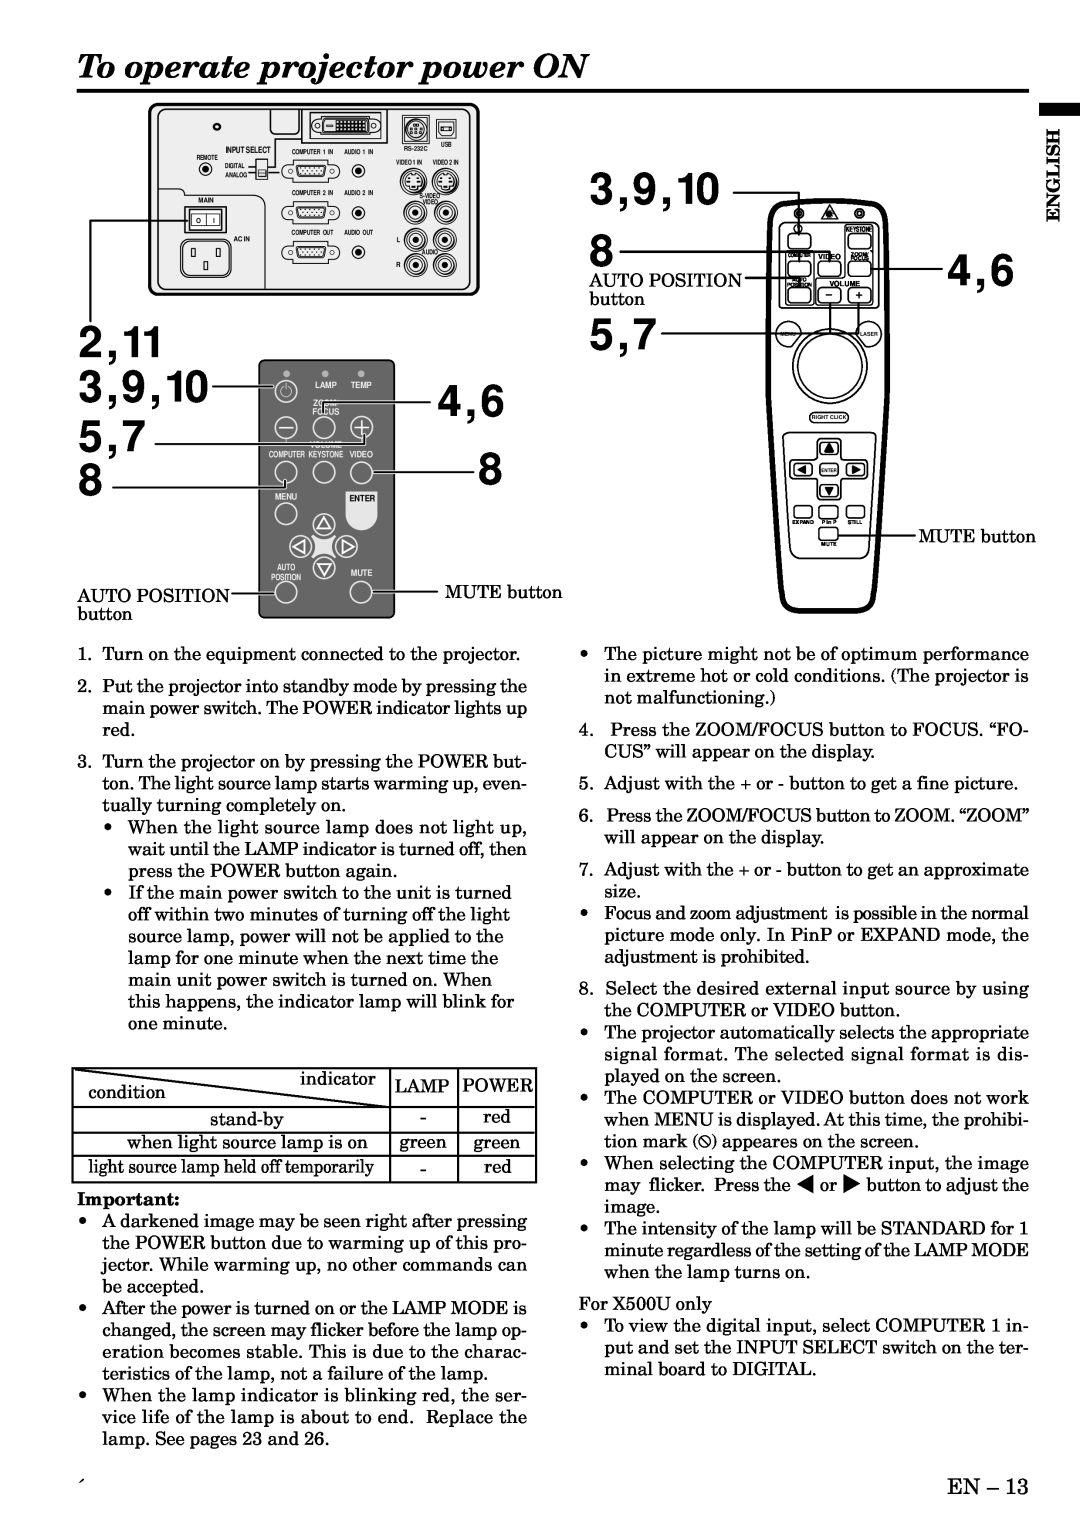 Mitsubishi Electronics X500, X490, S490 user manual To operate projector power ON, 9,10, English, Auto Position, button 